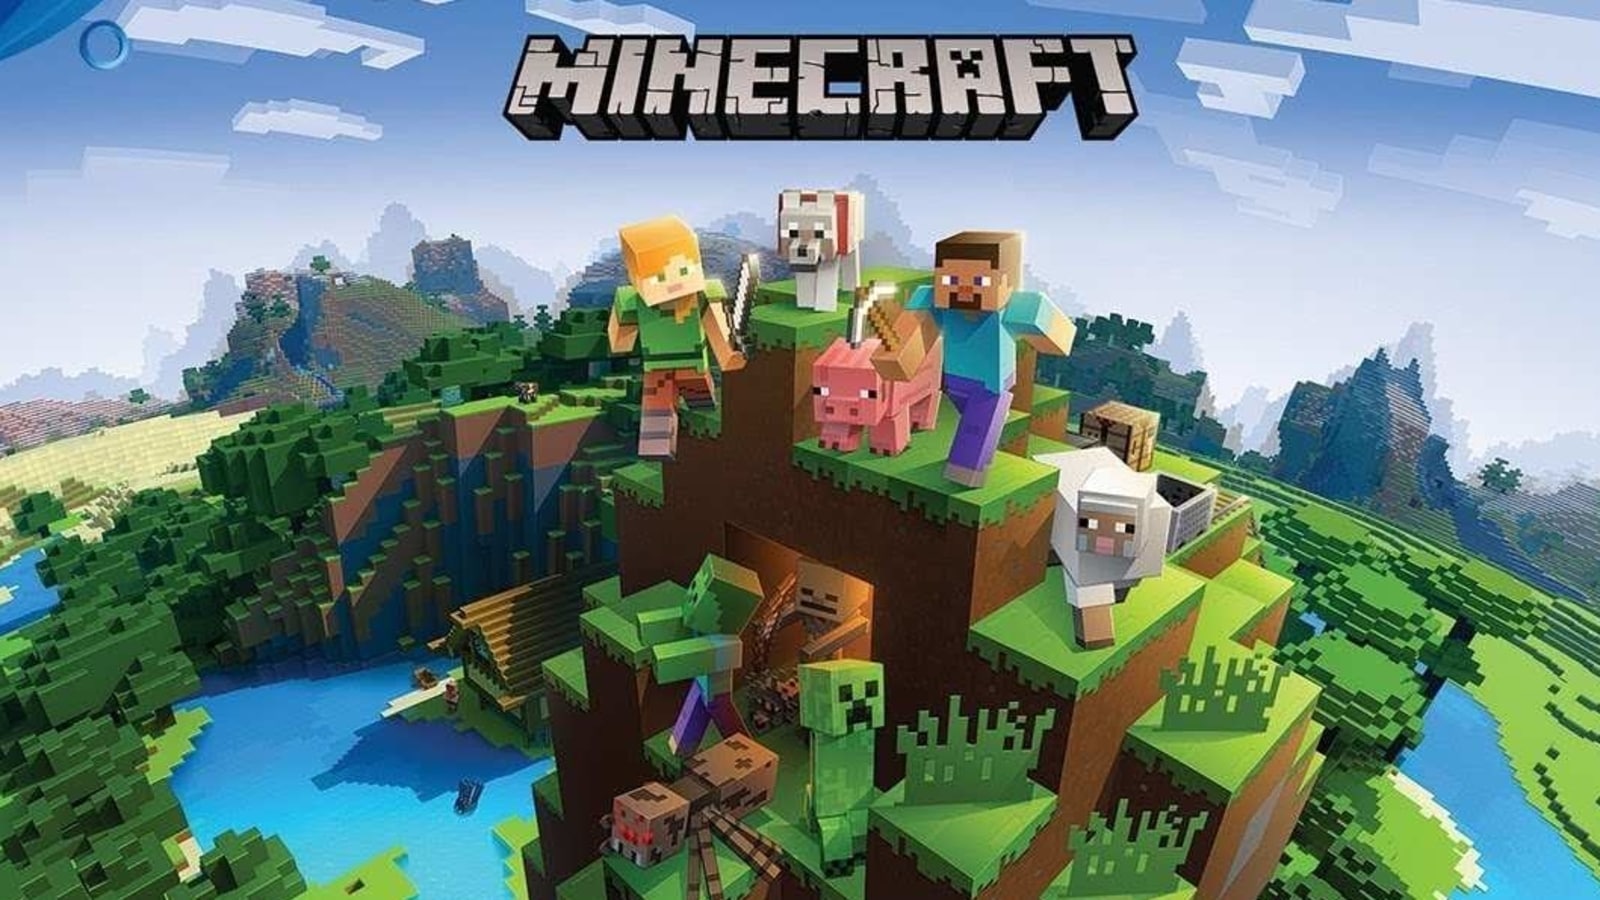 This is still in my Google play library : r/Minecraft